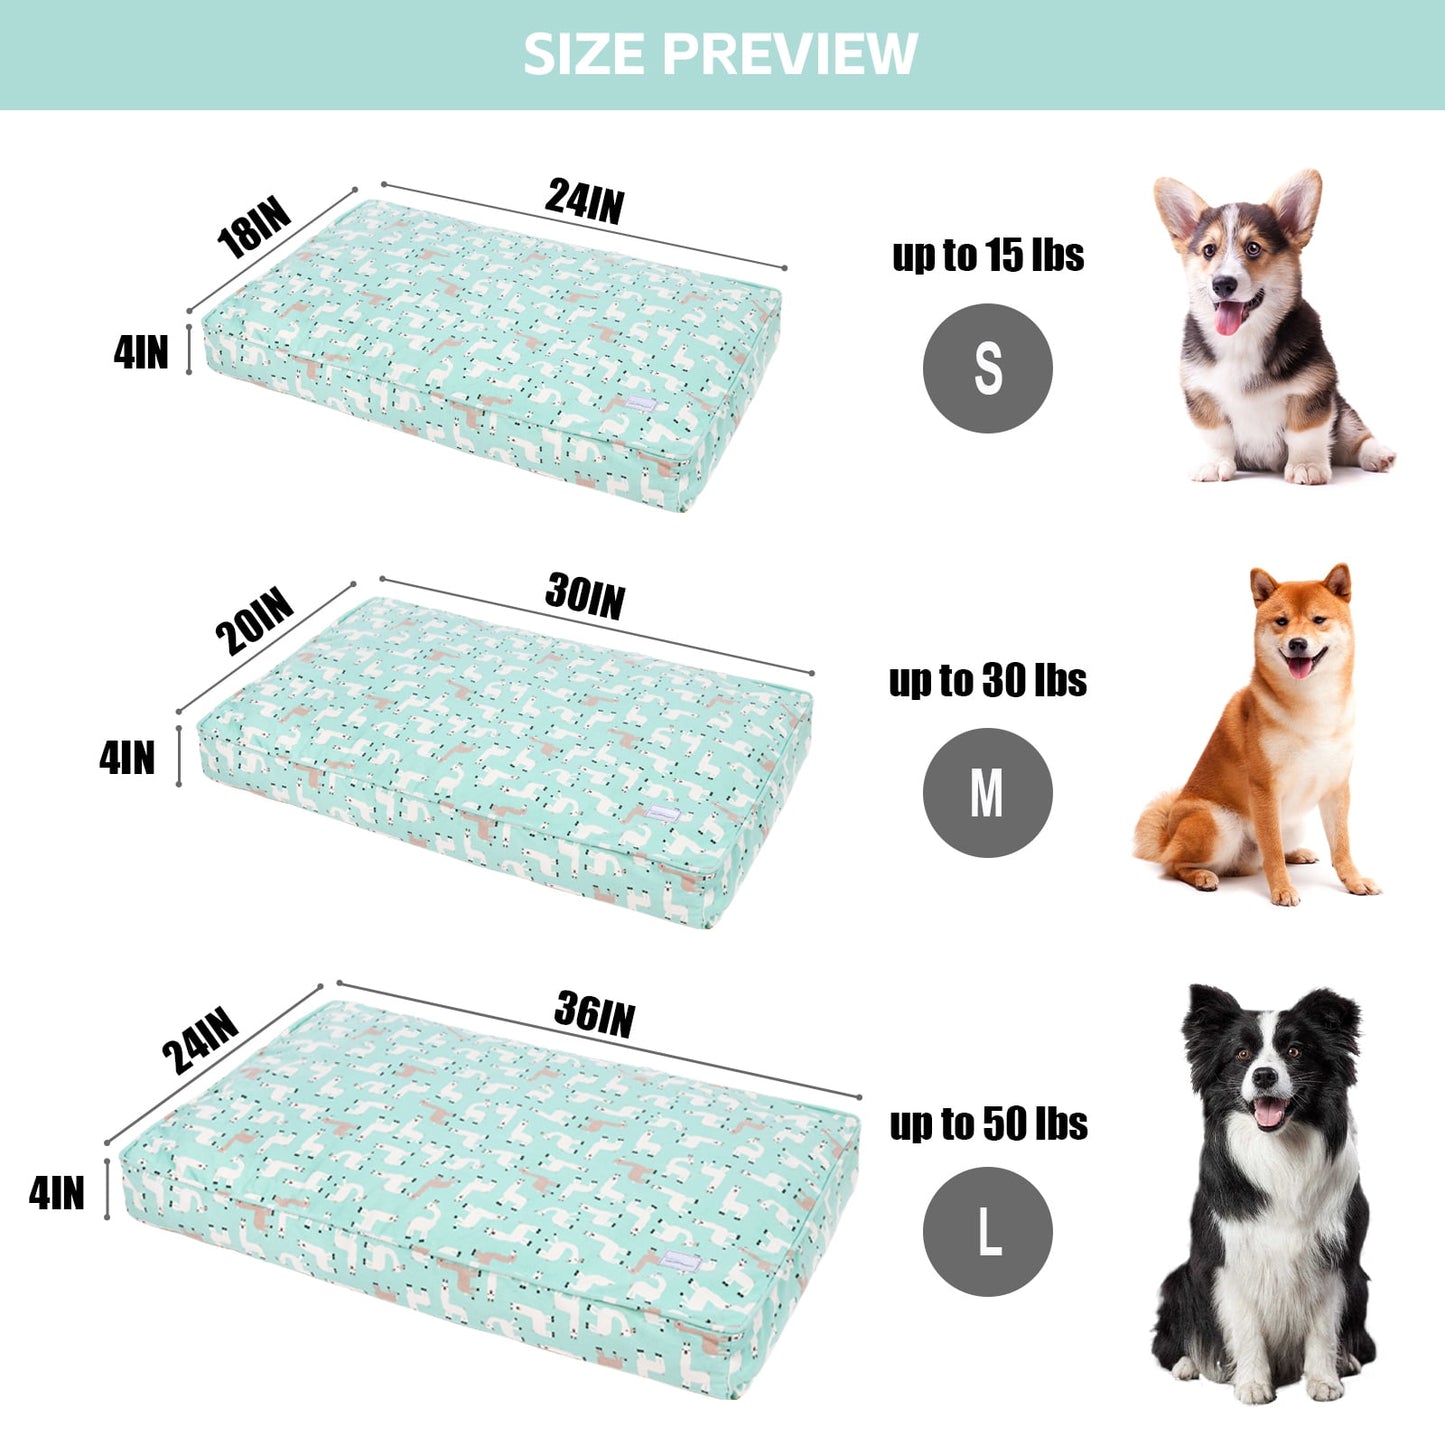 Exclusivo Mezcla Orthopedic Dog Bed for Medium Dogs, Shredded Memory Foam Supportive Therapy Fillings Pet Bed, Soft Warm Washable Cat Cuddler Bed, Alpaca 30''x20''